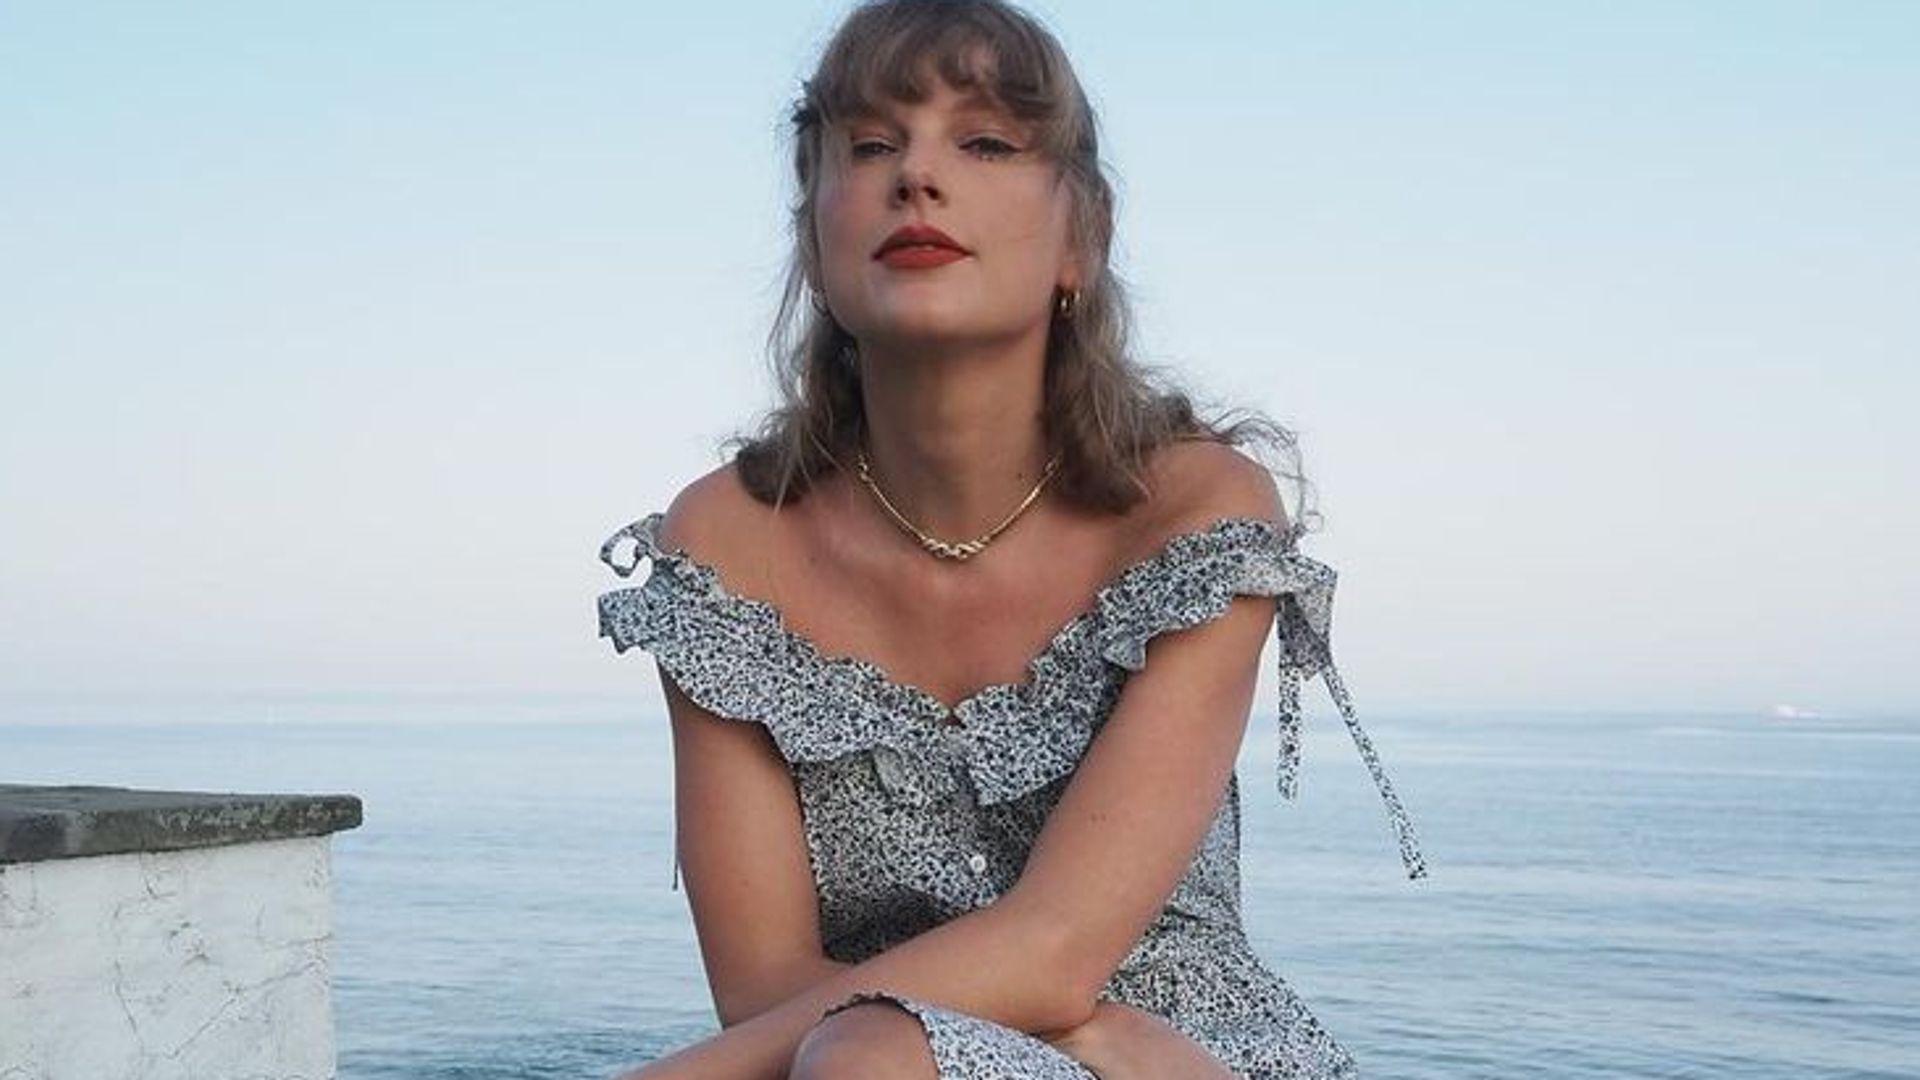 Taylor Swift sits on wall with sea behind her